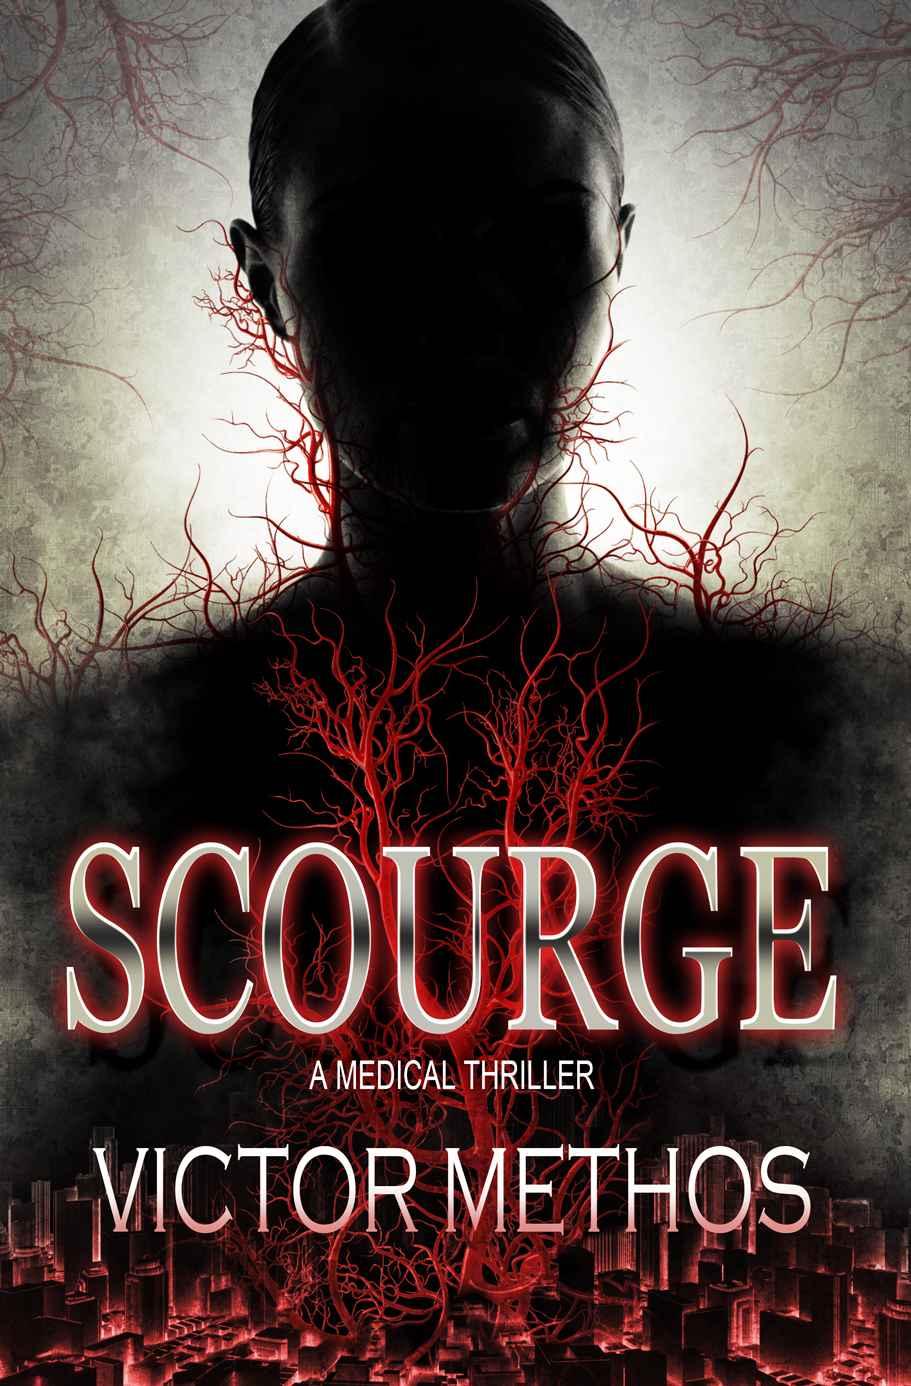 Scourge - A Medical Thriller (The Plague Trilogy Book 3) by Victor Methos